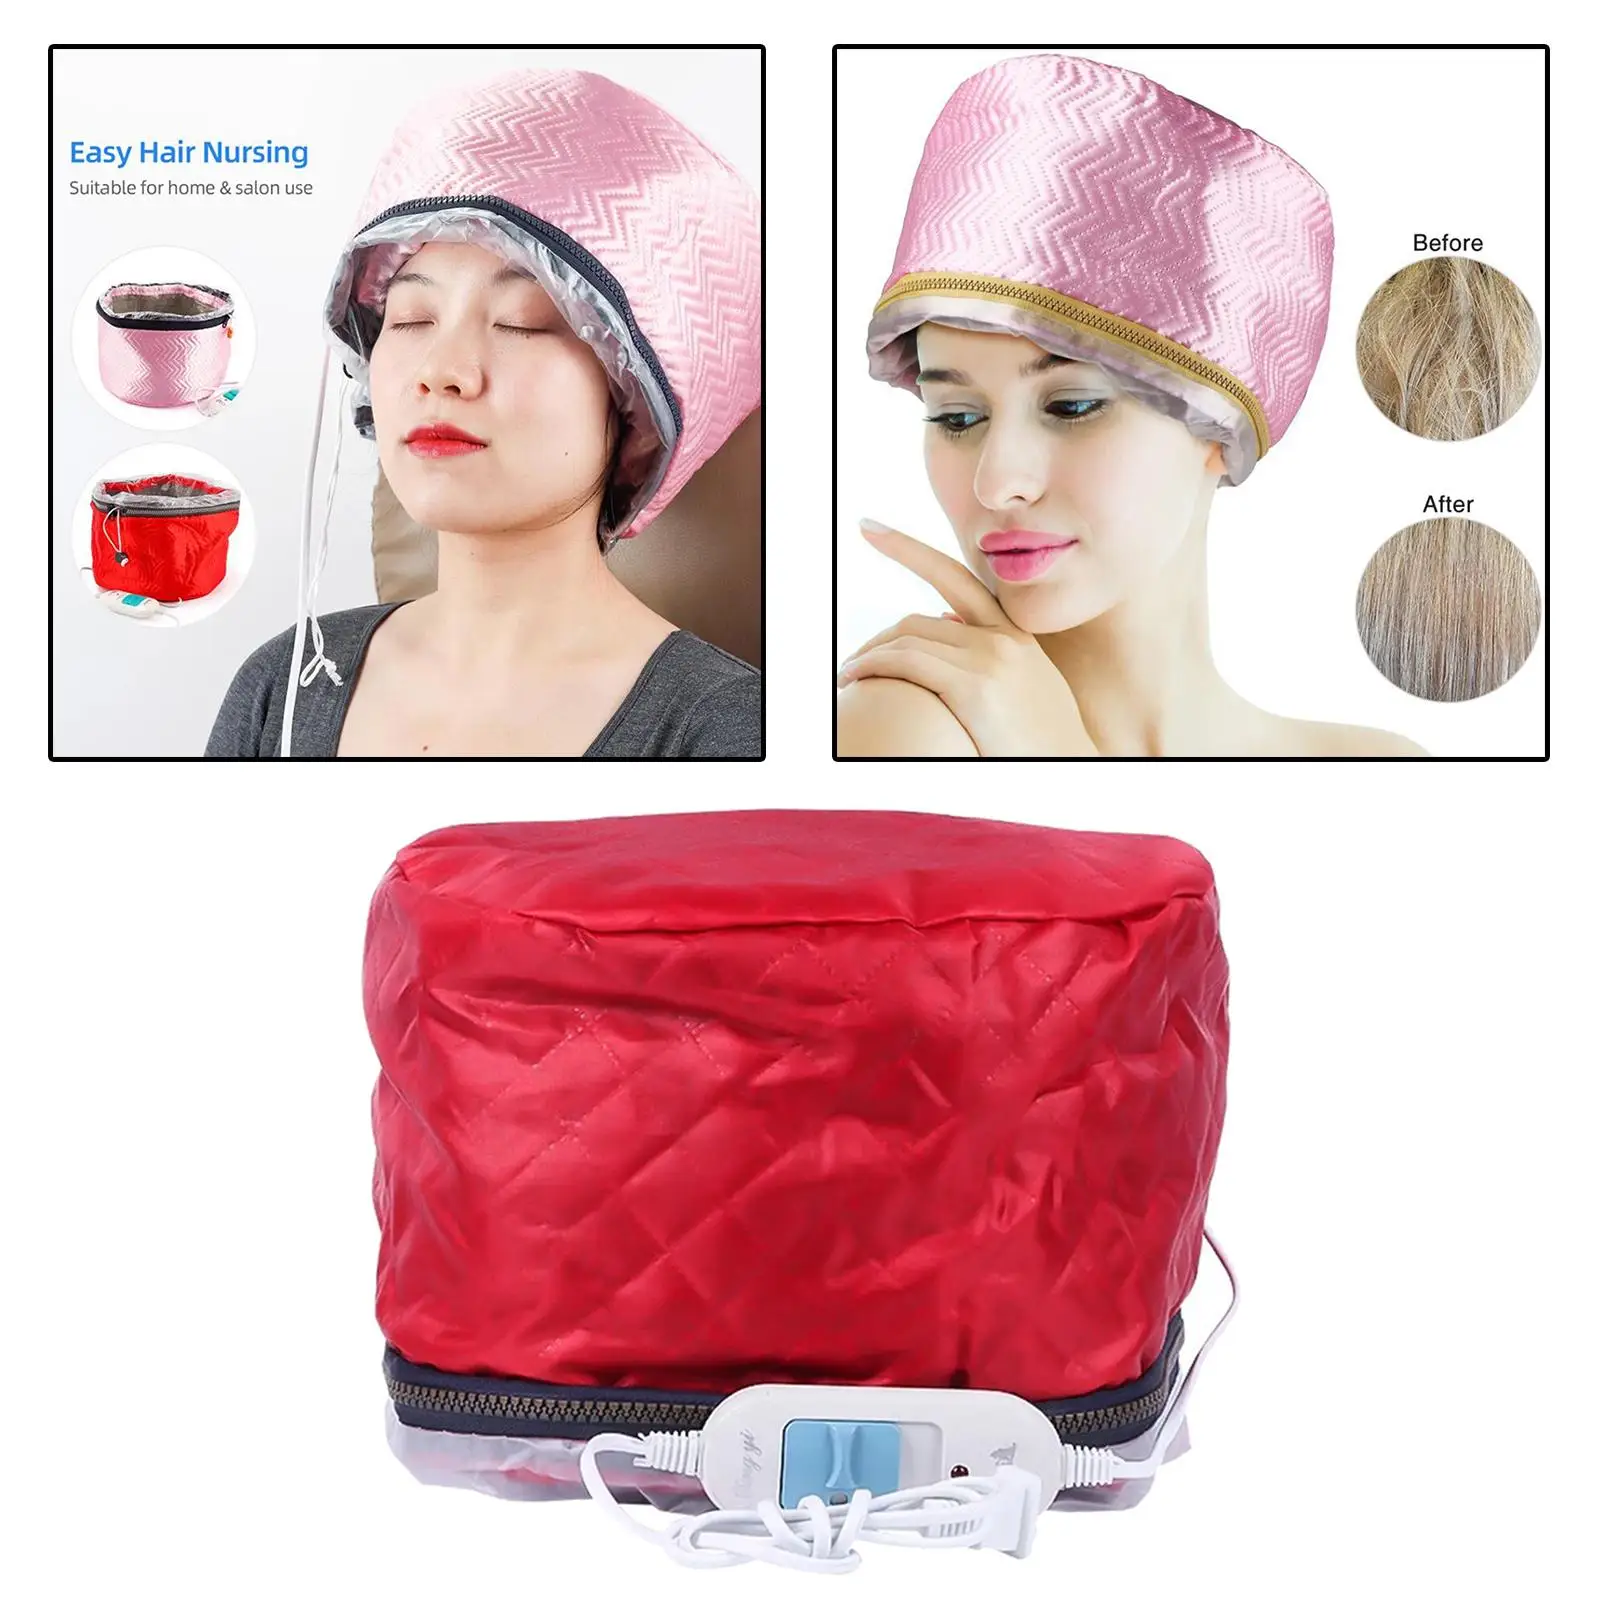 Hair Heating Caps Steamer 3 Modes Household Safe Red Microwave Hot Caps for Deep  Conditioning Salon Curly Hair Curling Hair SPA|Caps, Foils & Wraps| -  AliExpress